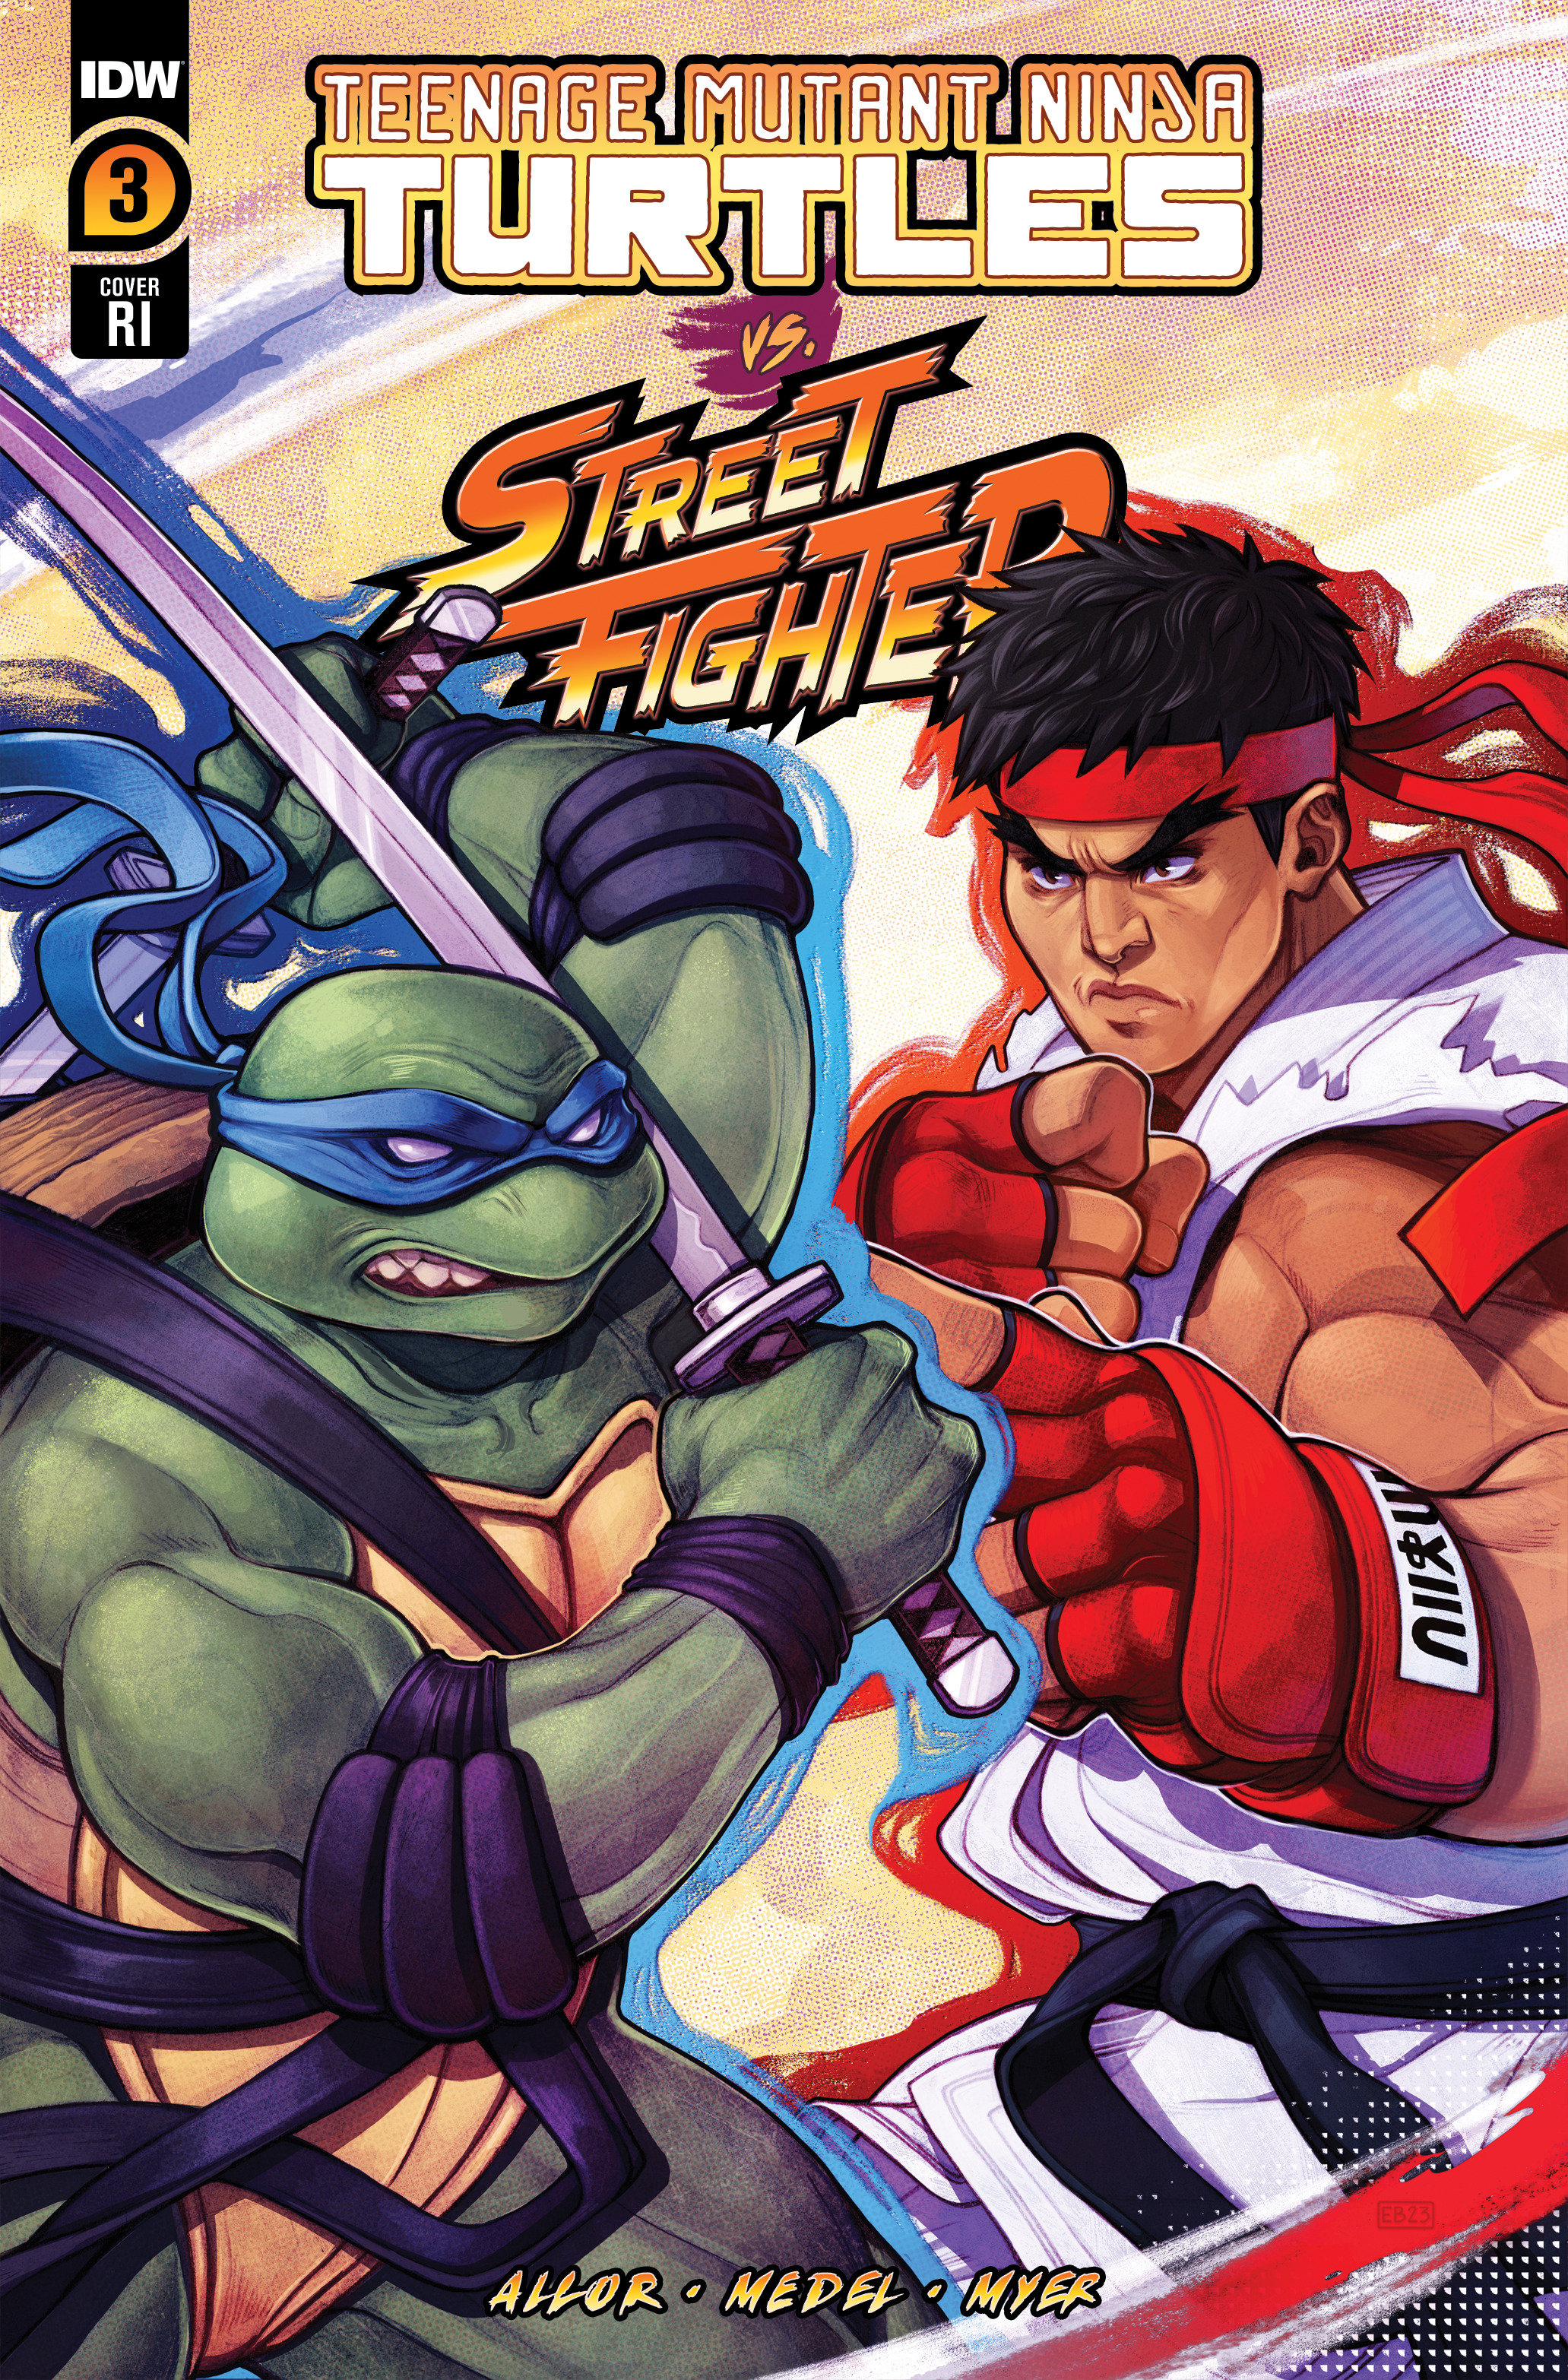 Teenage Mutant Ninja Turtles Vs. Street Fighter #3 Cover E 1 for 50 Incentive Beals